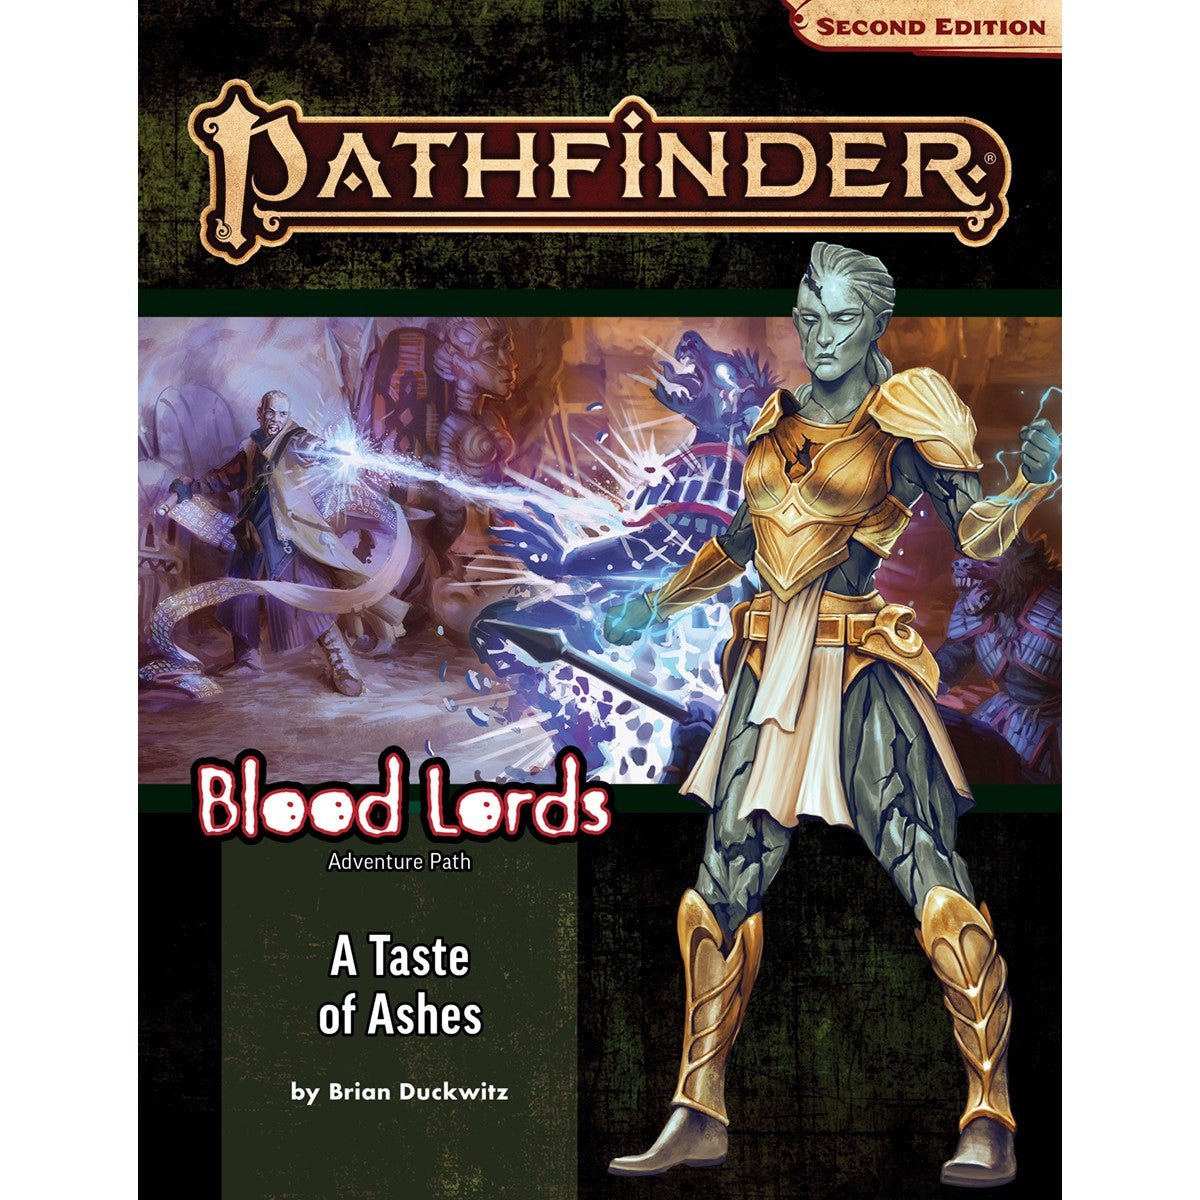 Pathfinder Second Edition Adventure Path Blood Lords #5 A Taste of Ashes